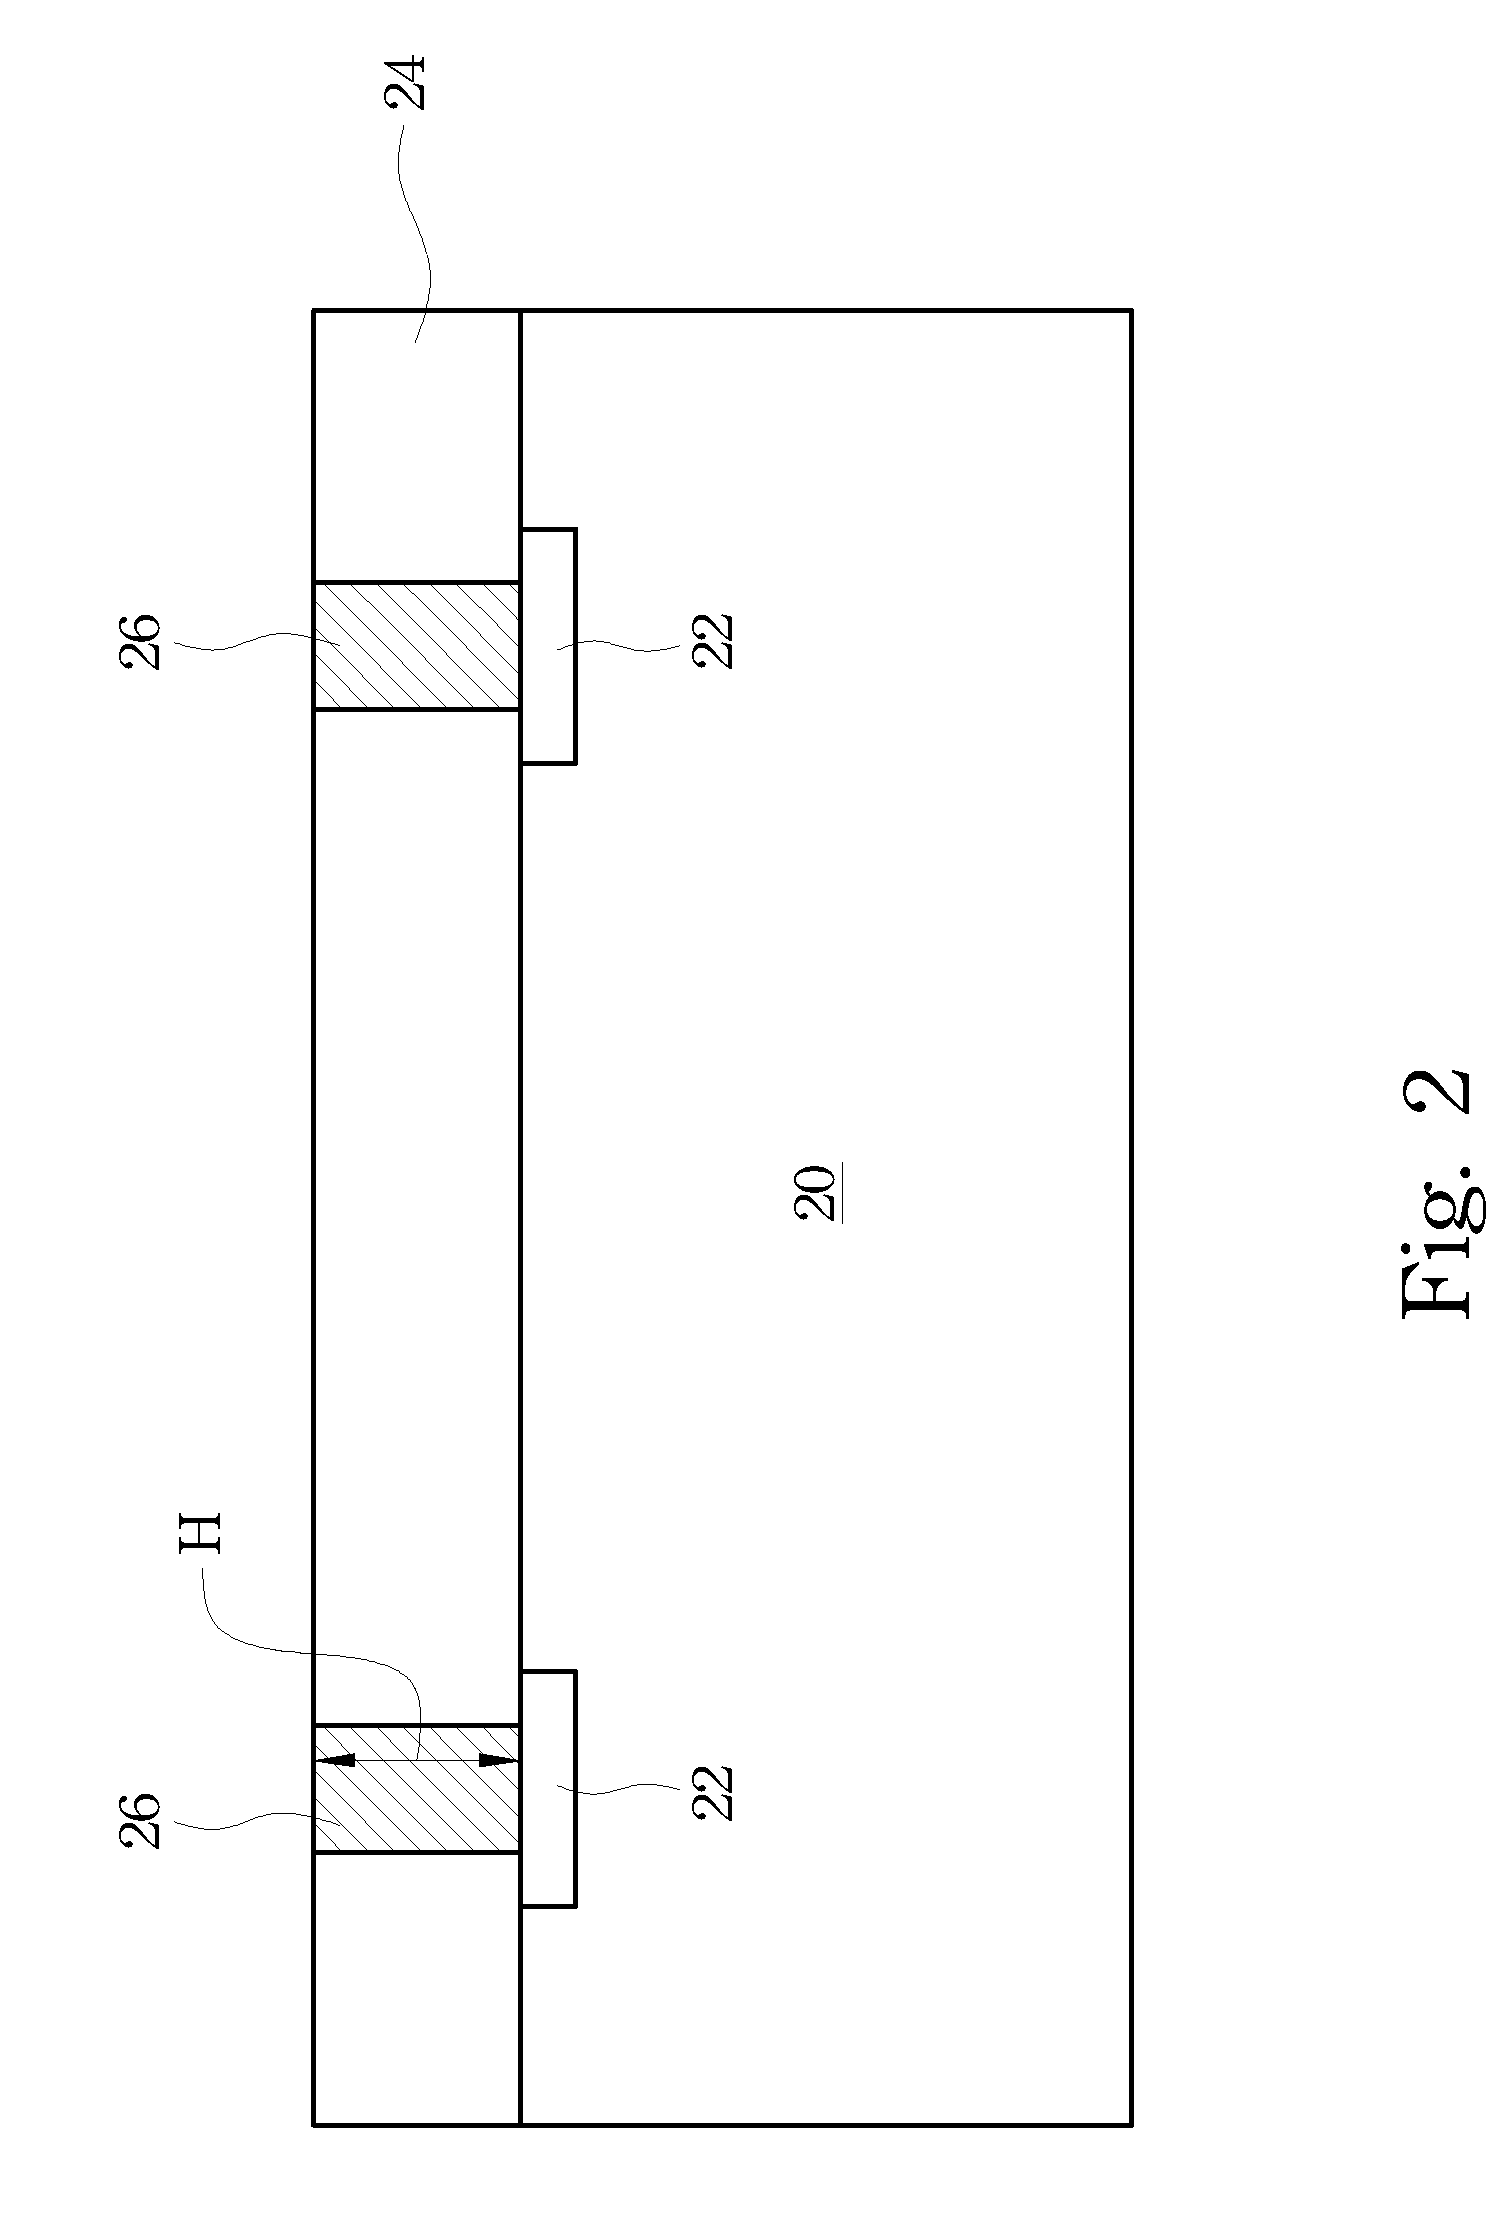 Wafer level package structure and fabrication methods